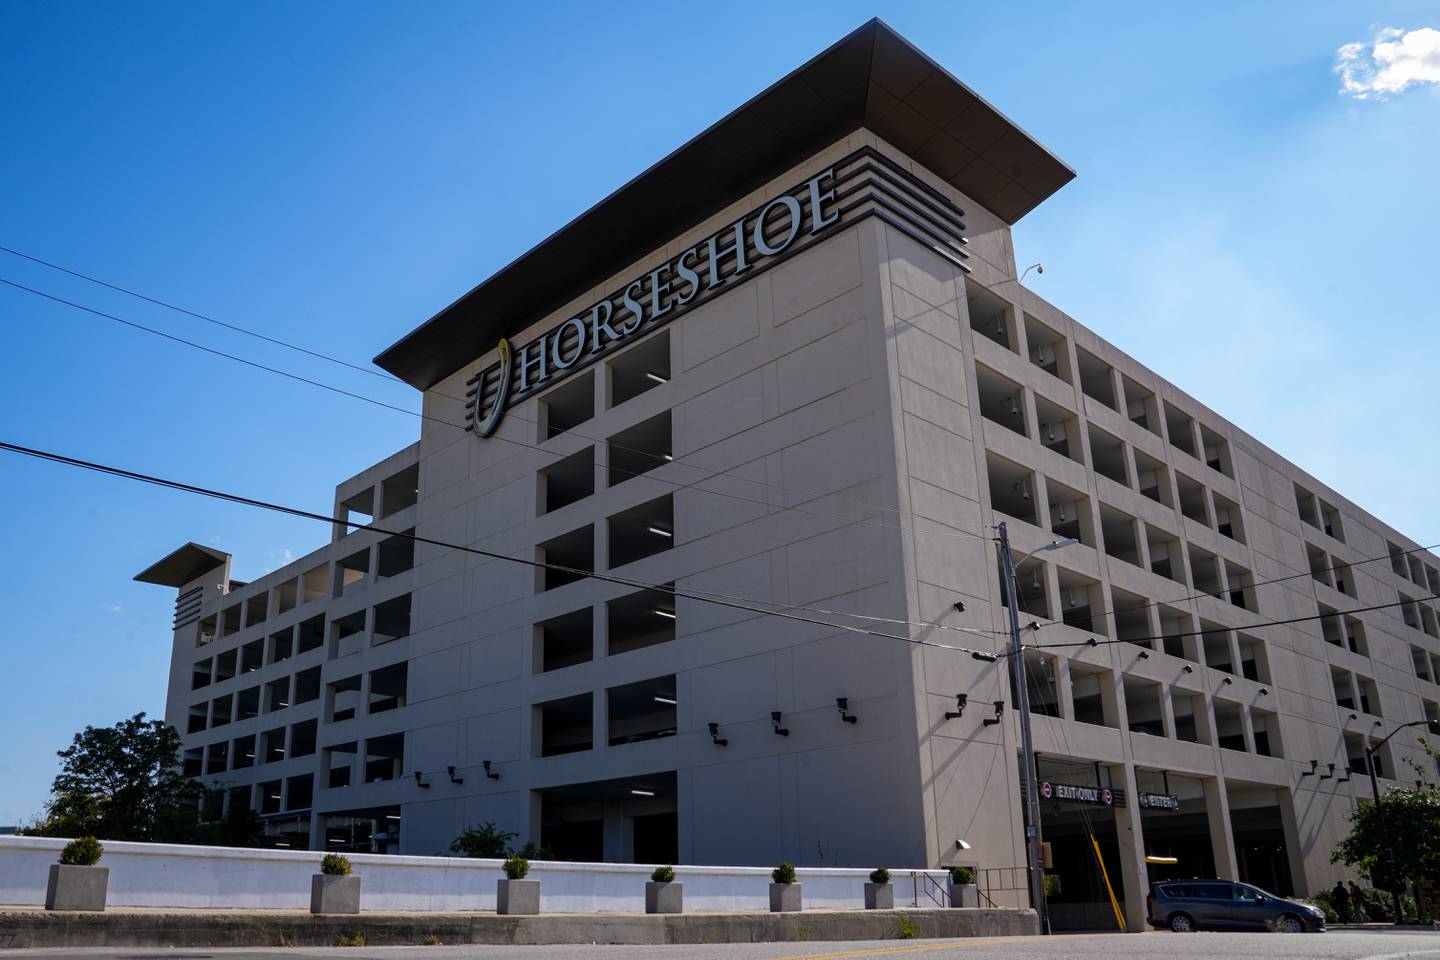 Exterior of Horseshoe Casino in South Baltimore on 10/7/22.